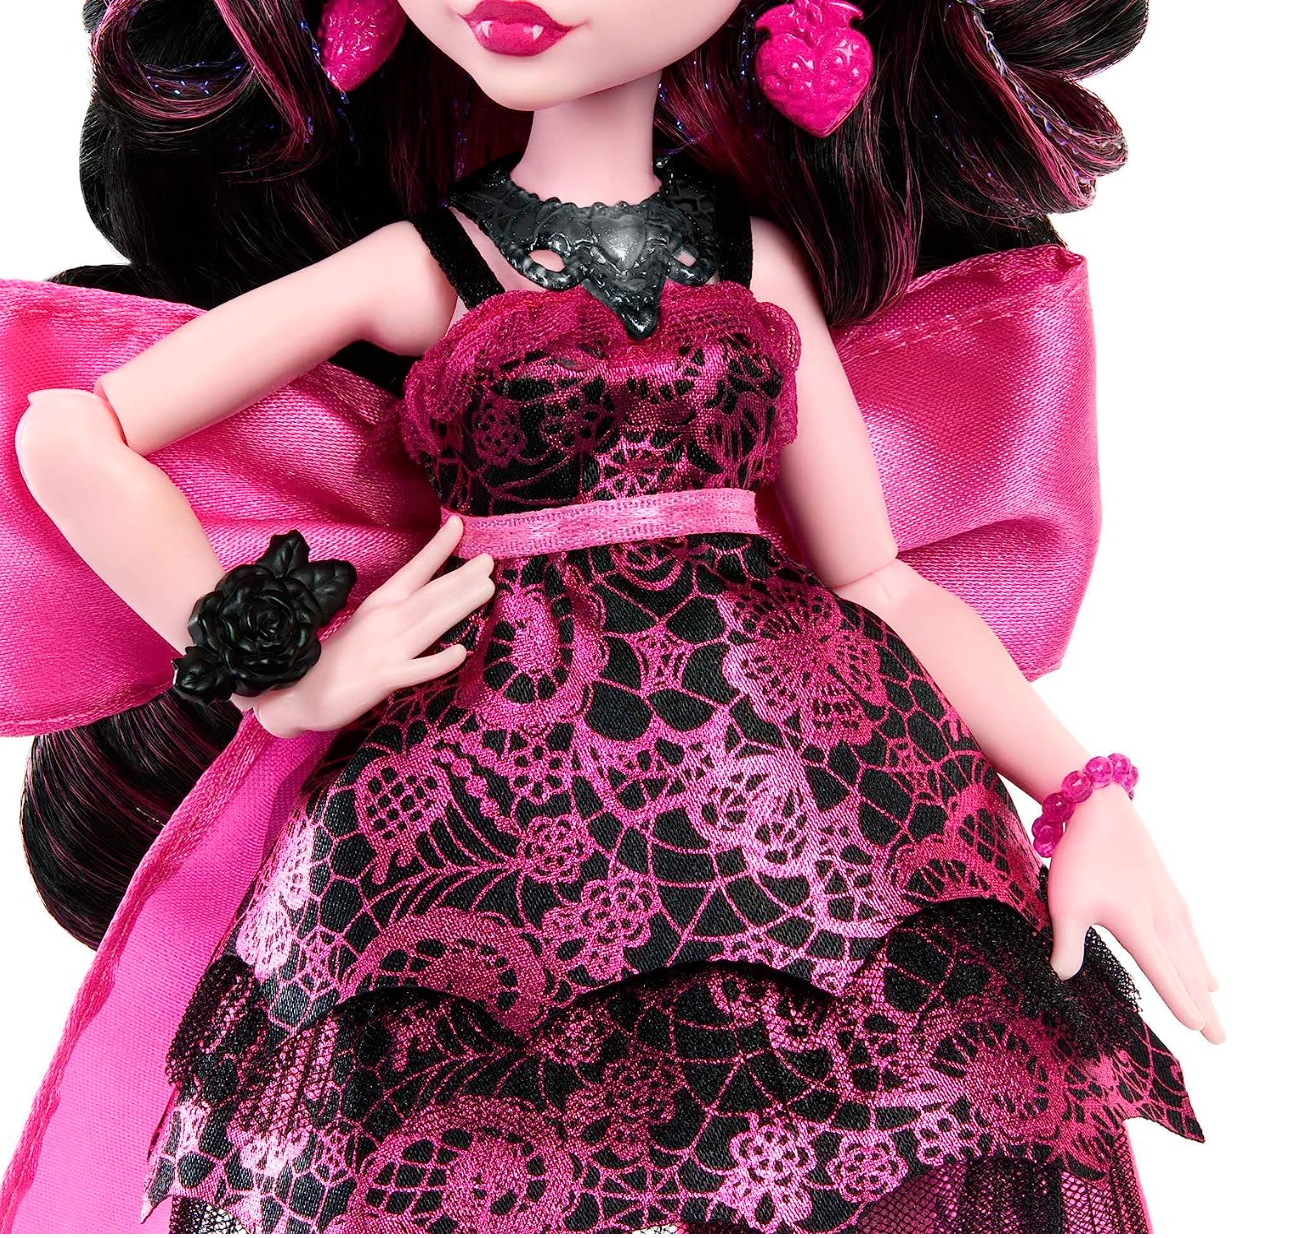 Monster High Draculaura Doll in Monster Ball Party Dress with Themed Accessories Like Chocolate Fountain